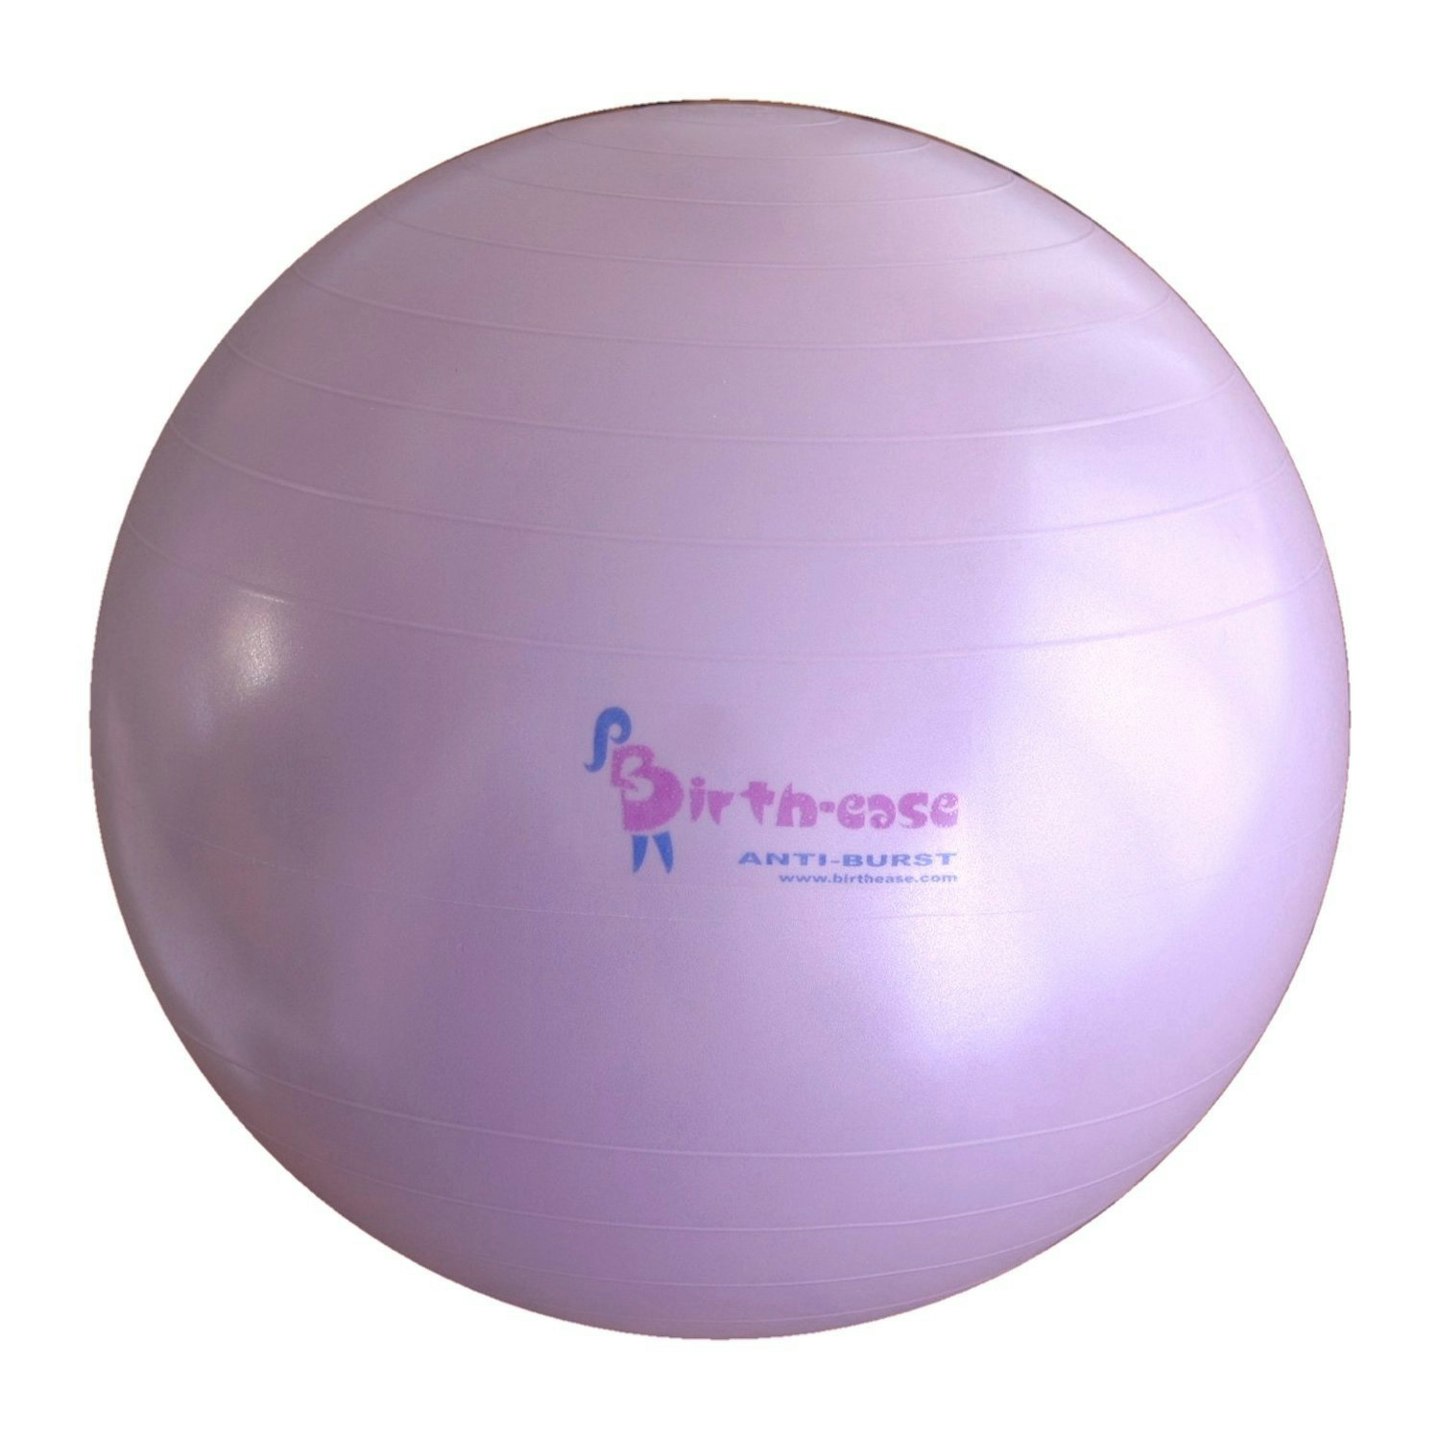 Birth-ease Birth Ball review